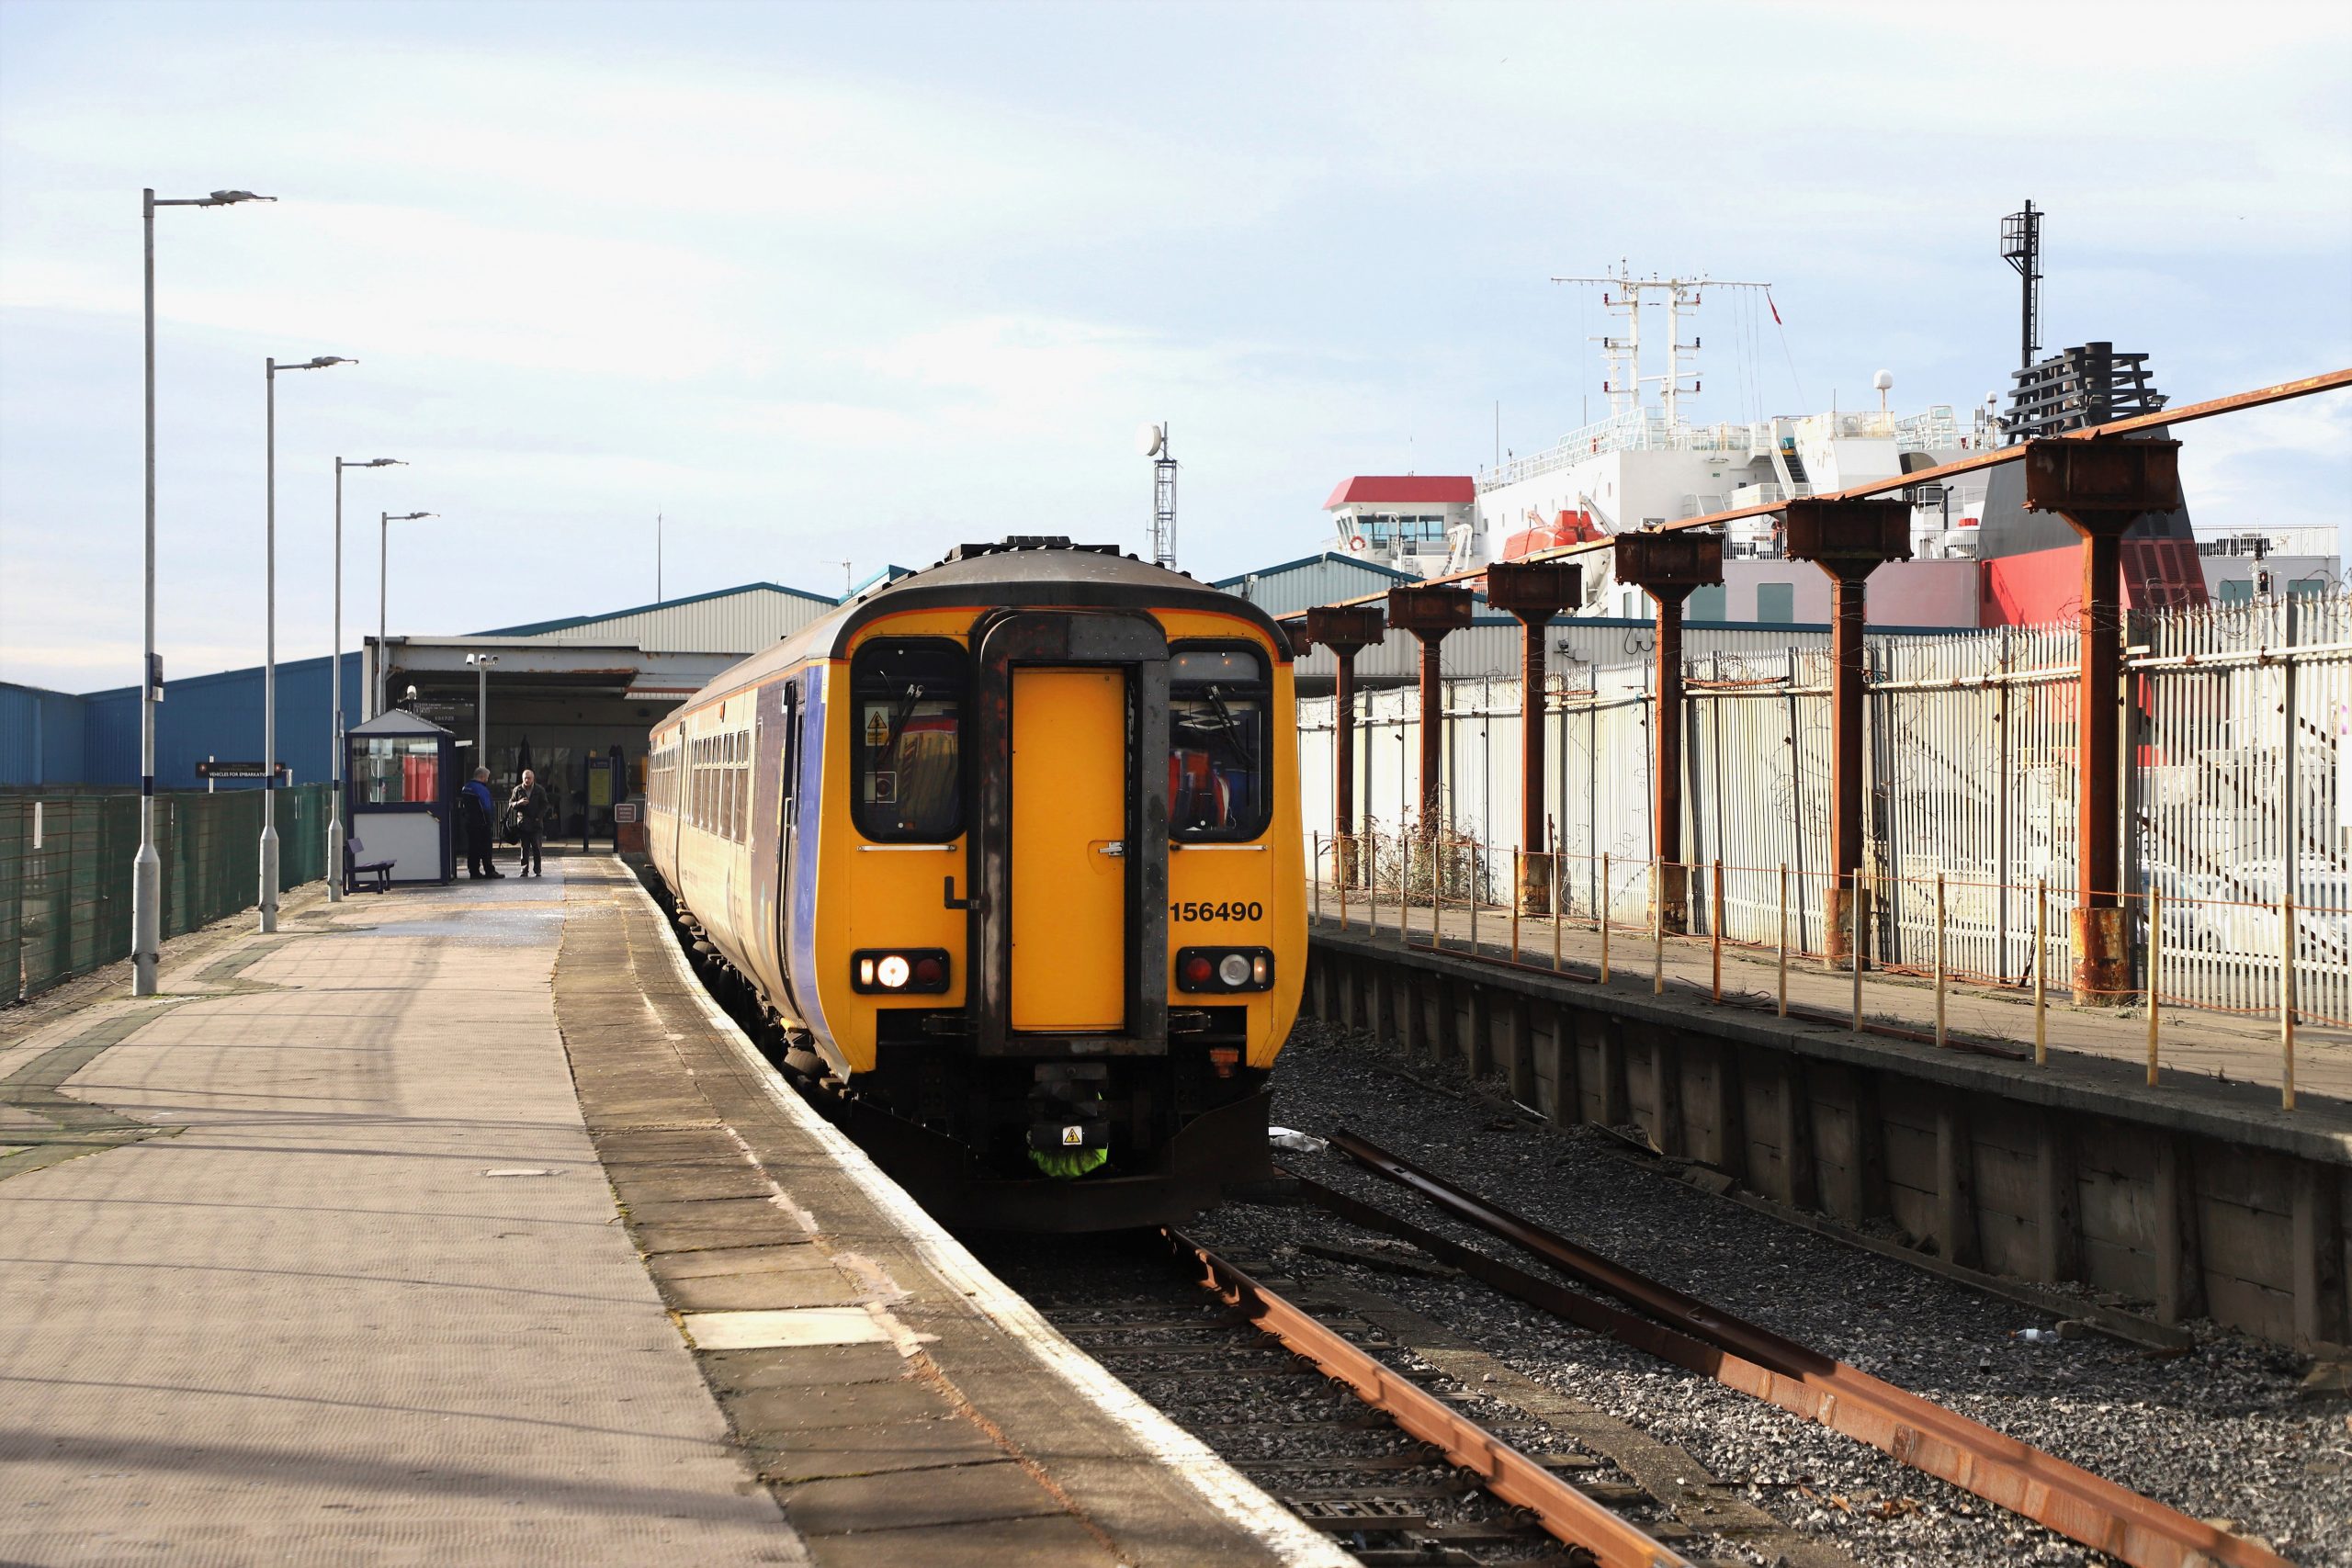 Timed to coincide with the Isle of Man ferry Unit 156490 waits at Heysham Harbour to form the once-daily shuttle to Lancaster : Image credit - Brian Roberts